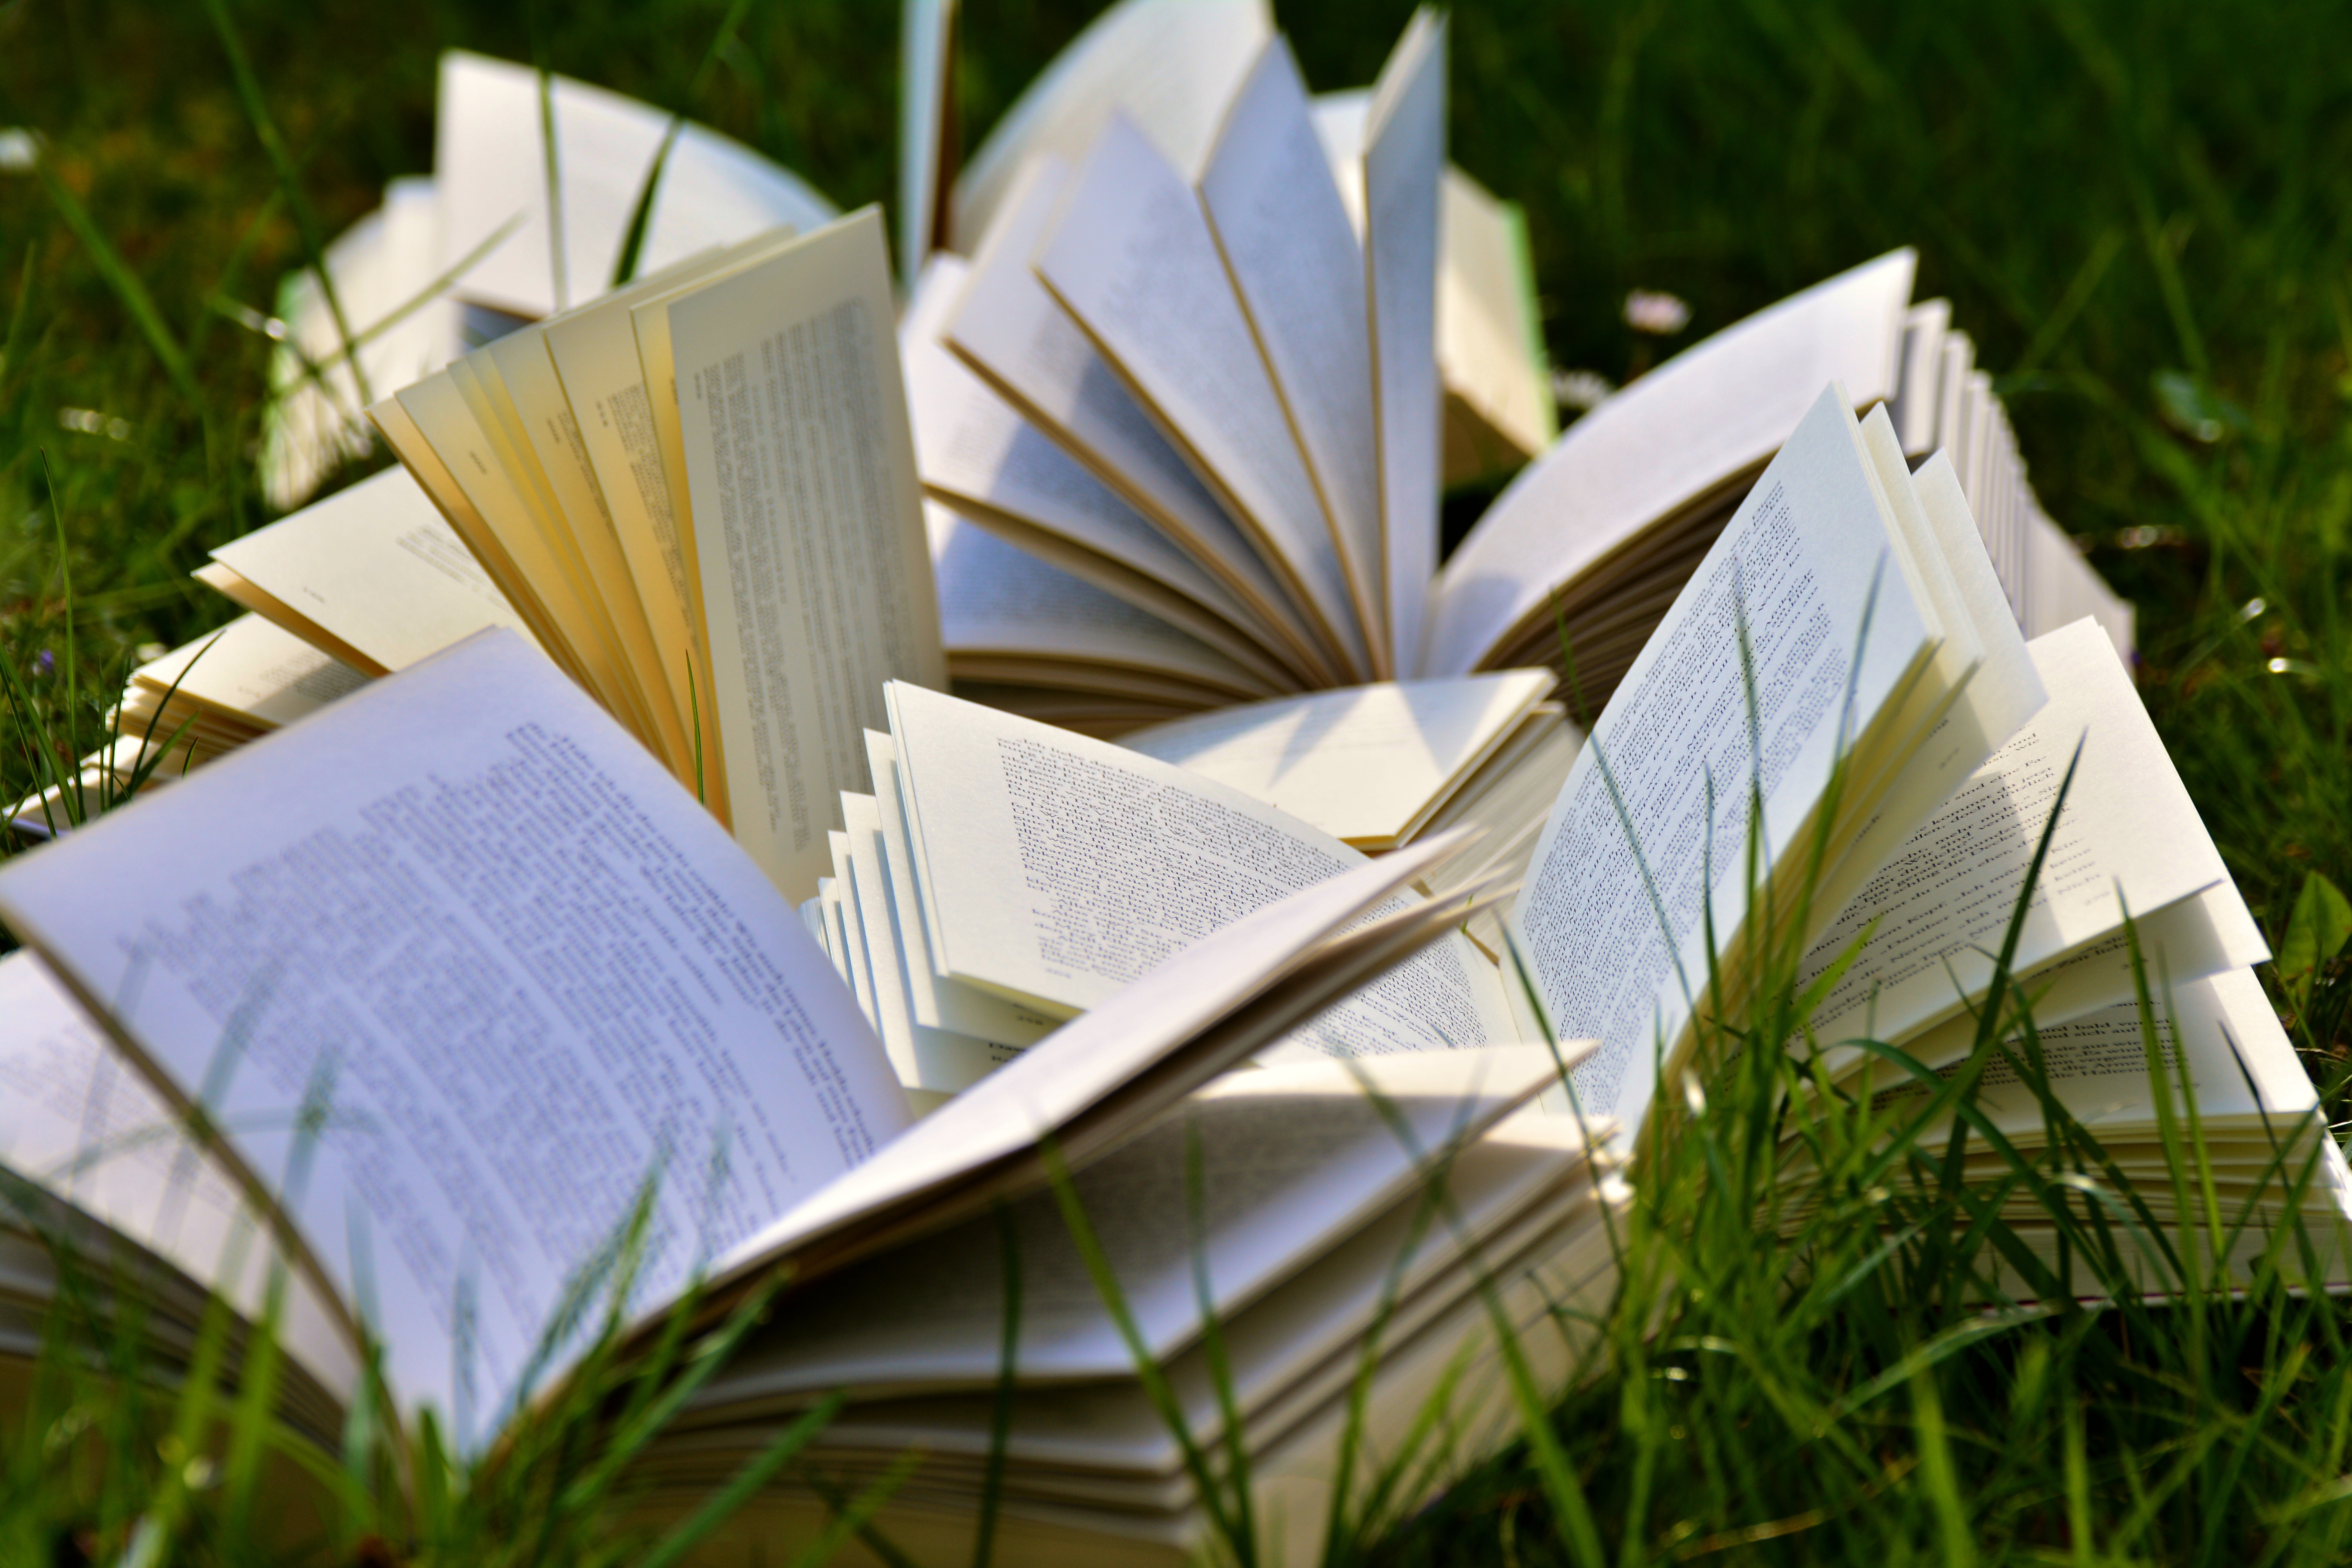 A pile of books in grass